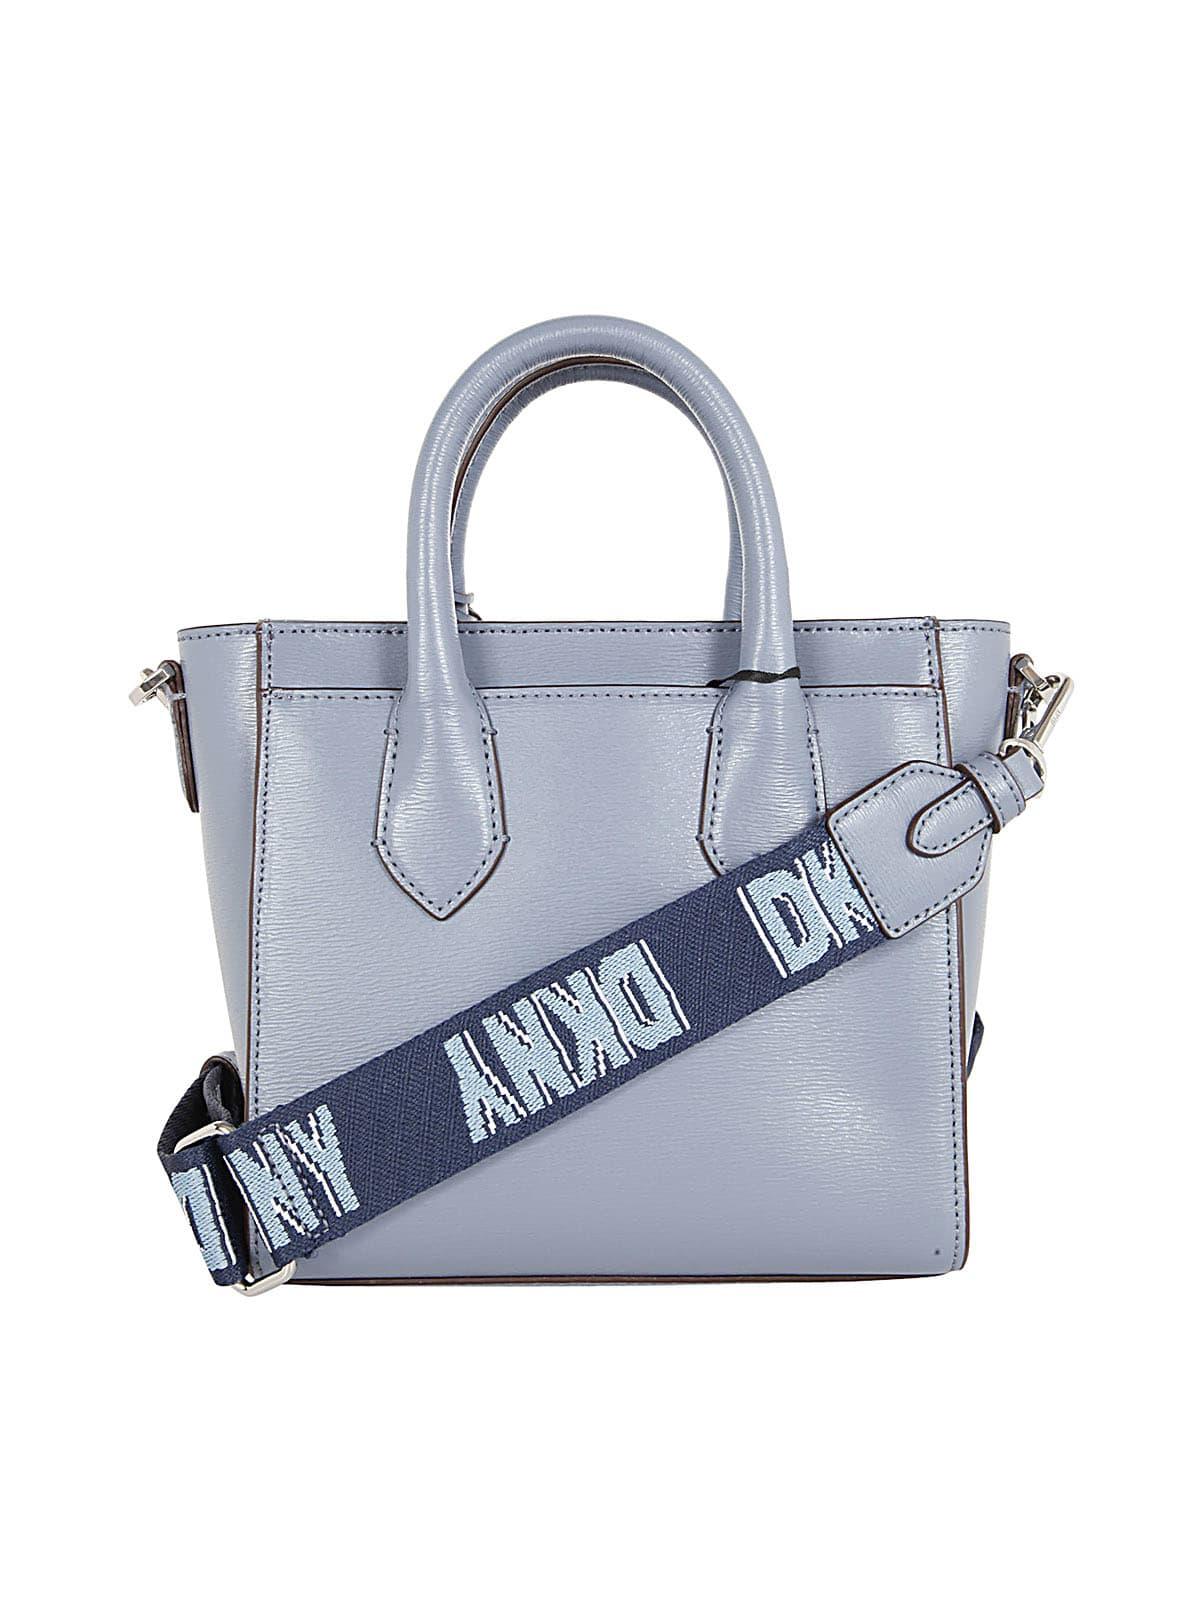 DKNY Leather Valery Sm Satchel Bag in q Steel Blue (Blue) | Lyst